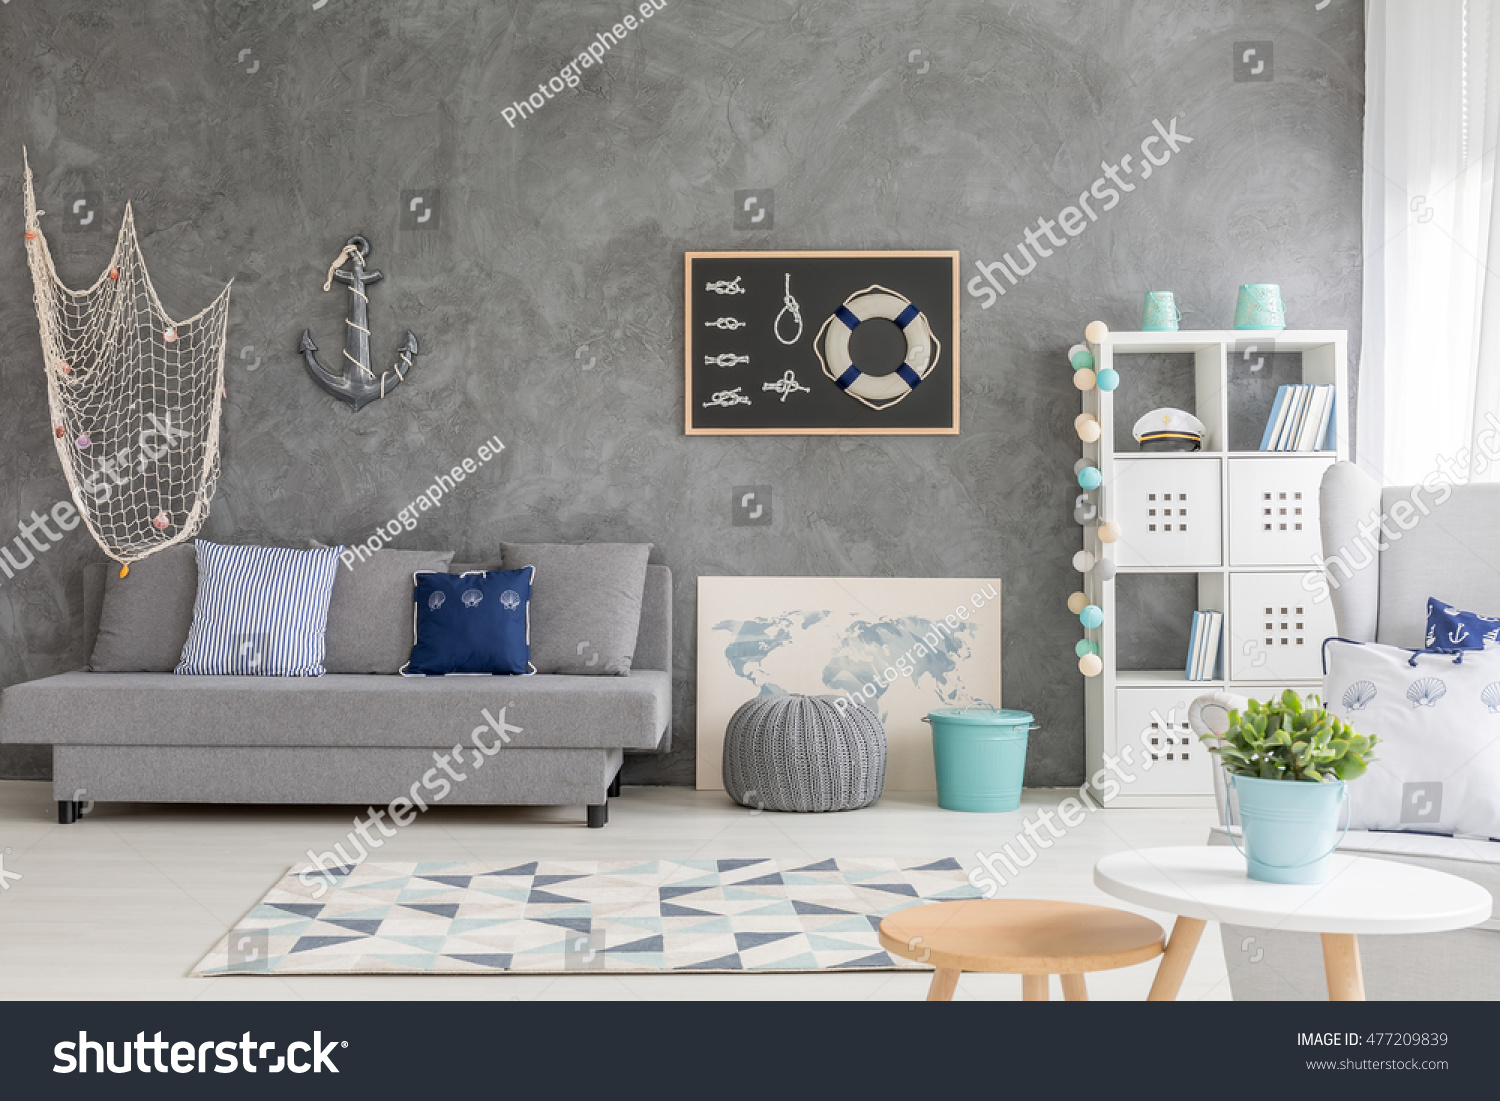 Bright room in shades of grey, with sailing decorations #477209839